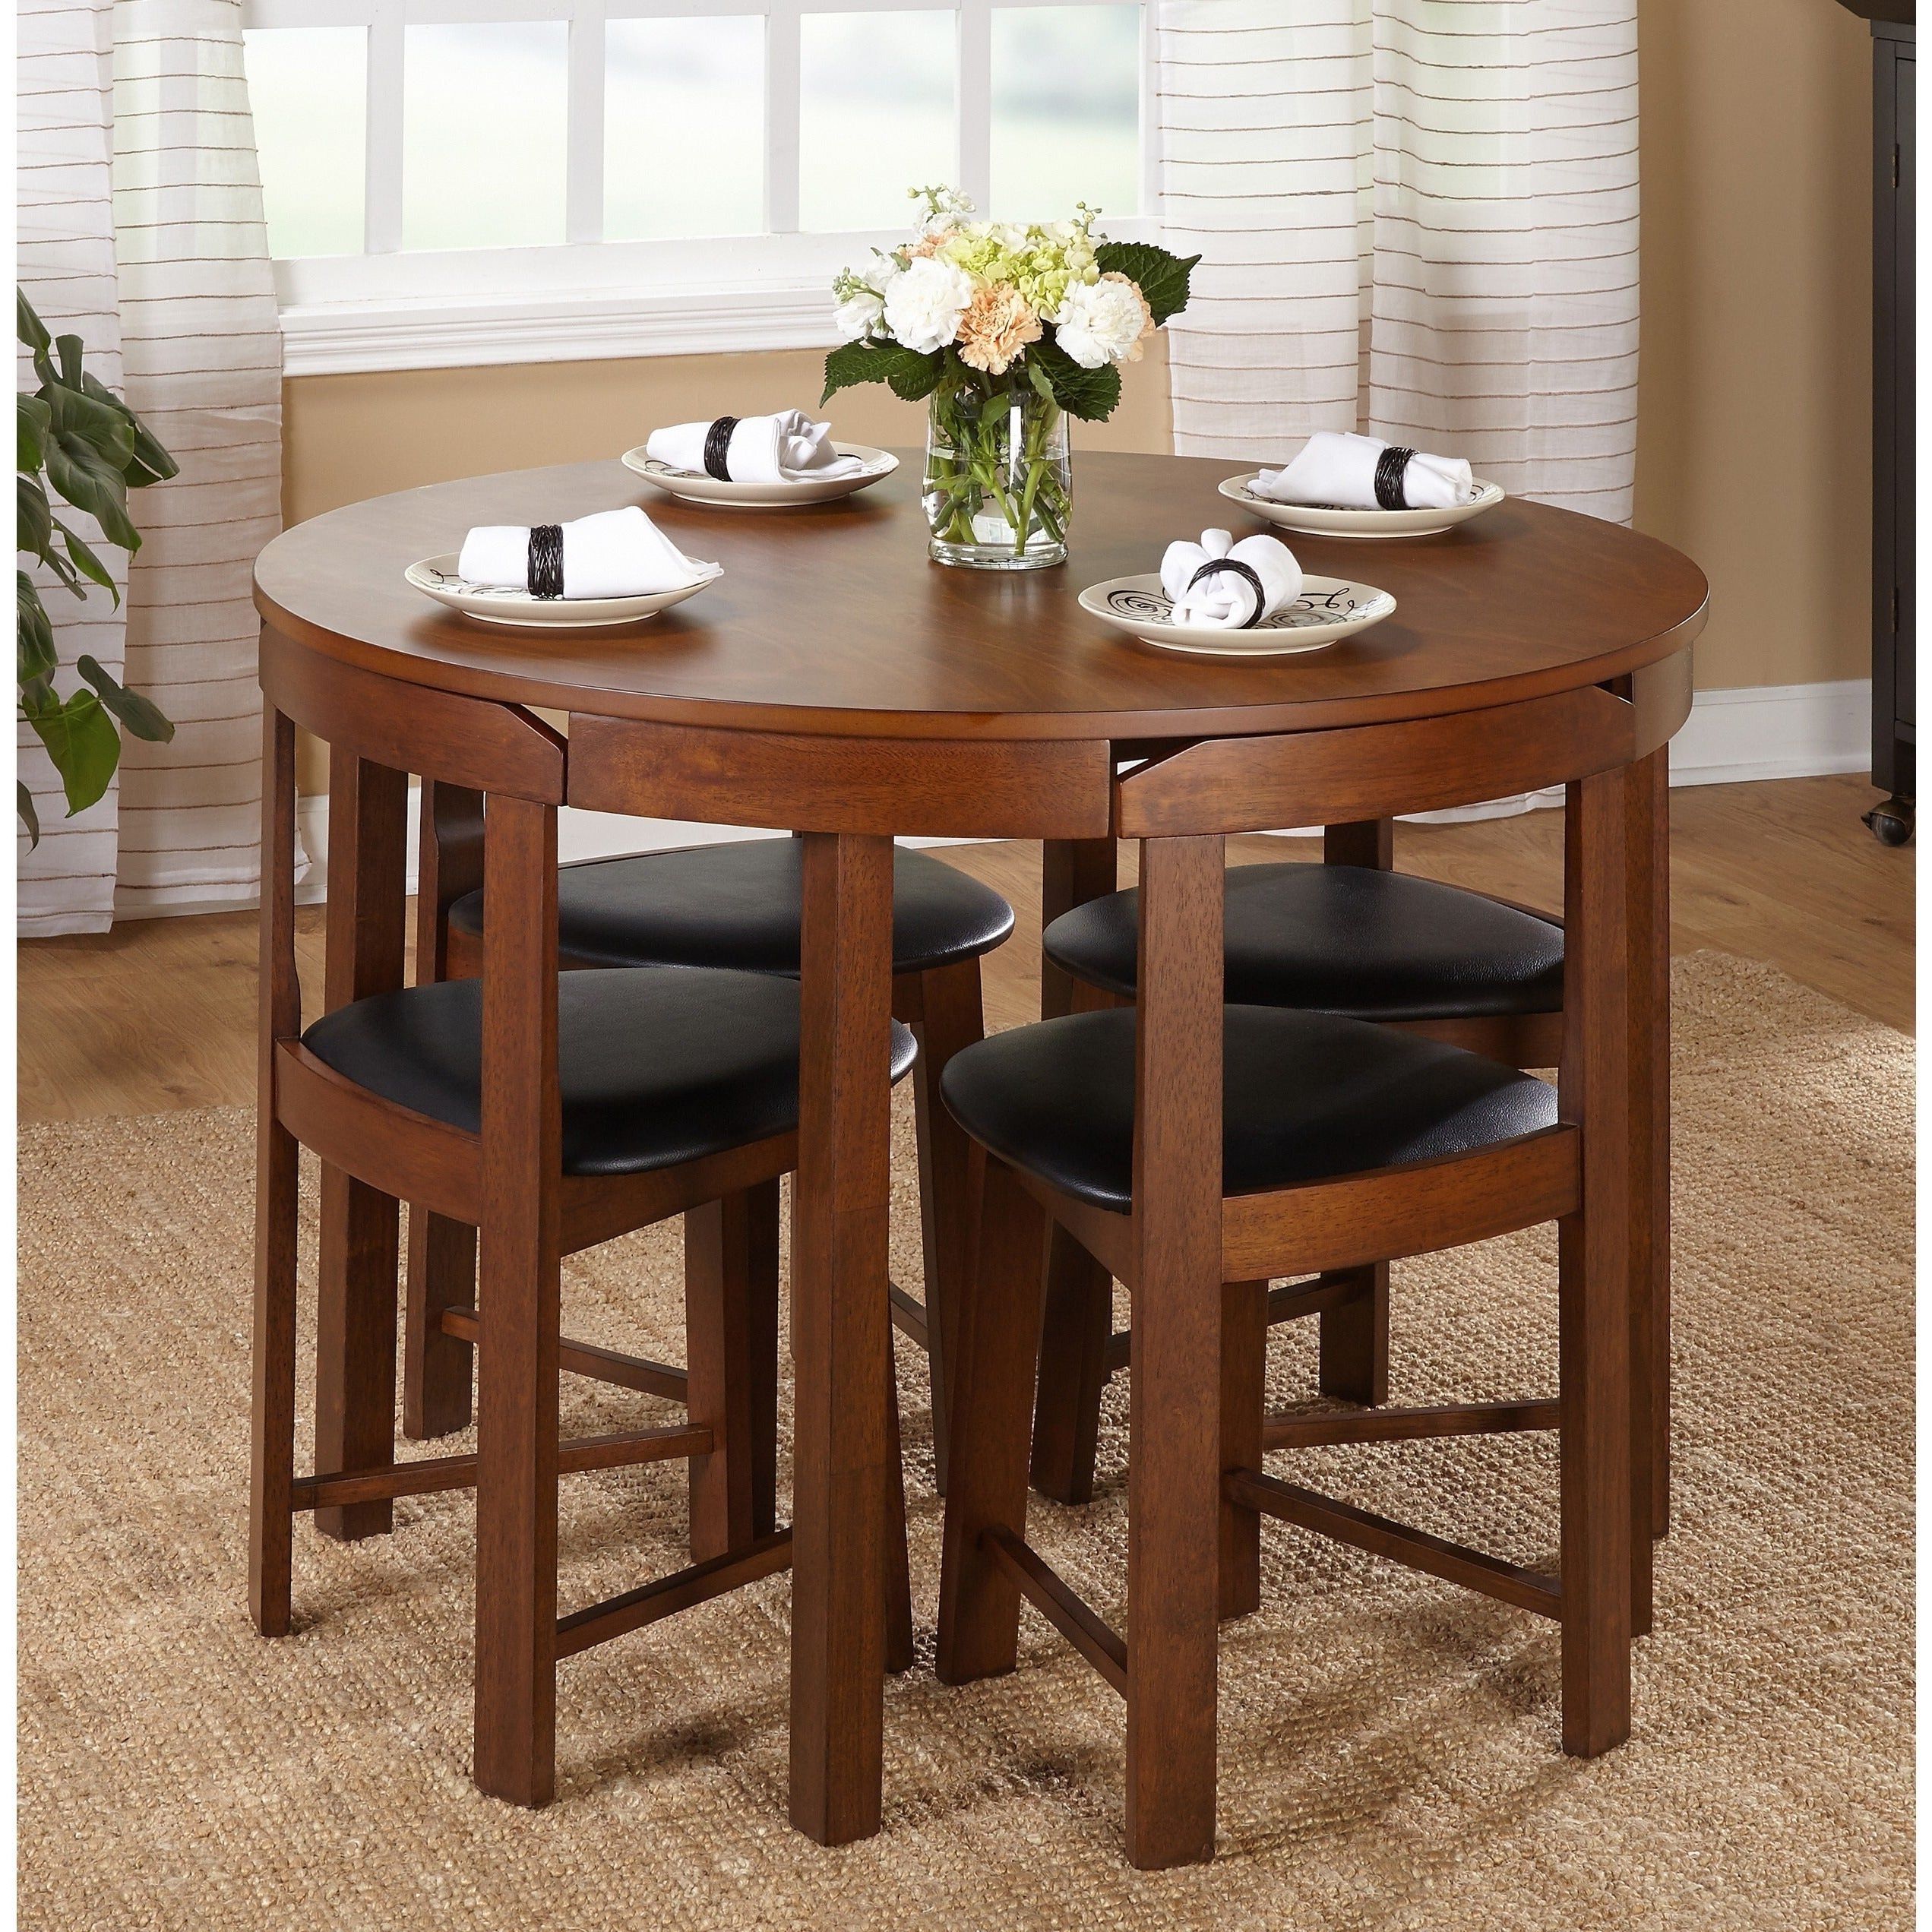 Newest Shop Harrisburg 5 Piece Tobey Compact Round Dining Set Free – Layjao In 5 Piece Round Dining Sets (View 10 of 15)